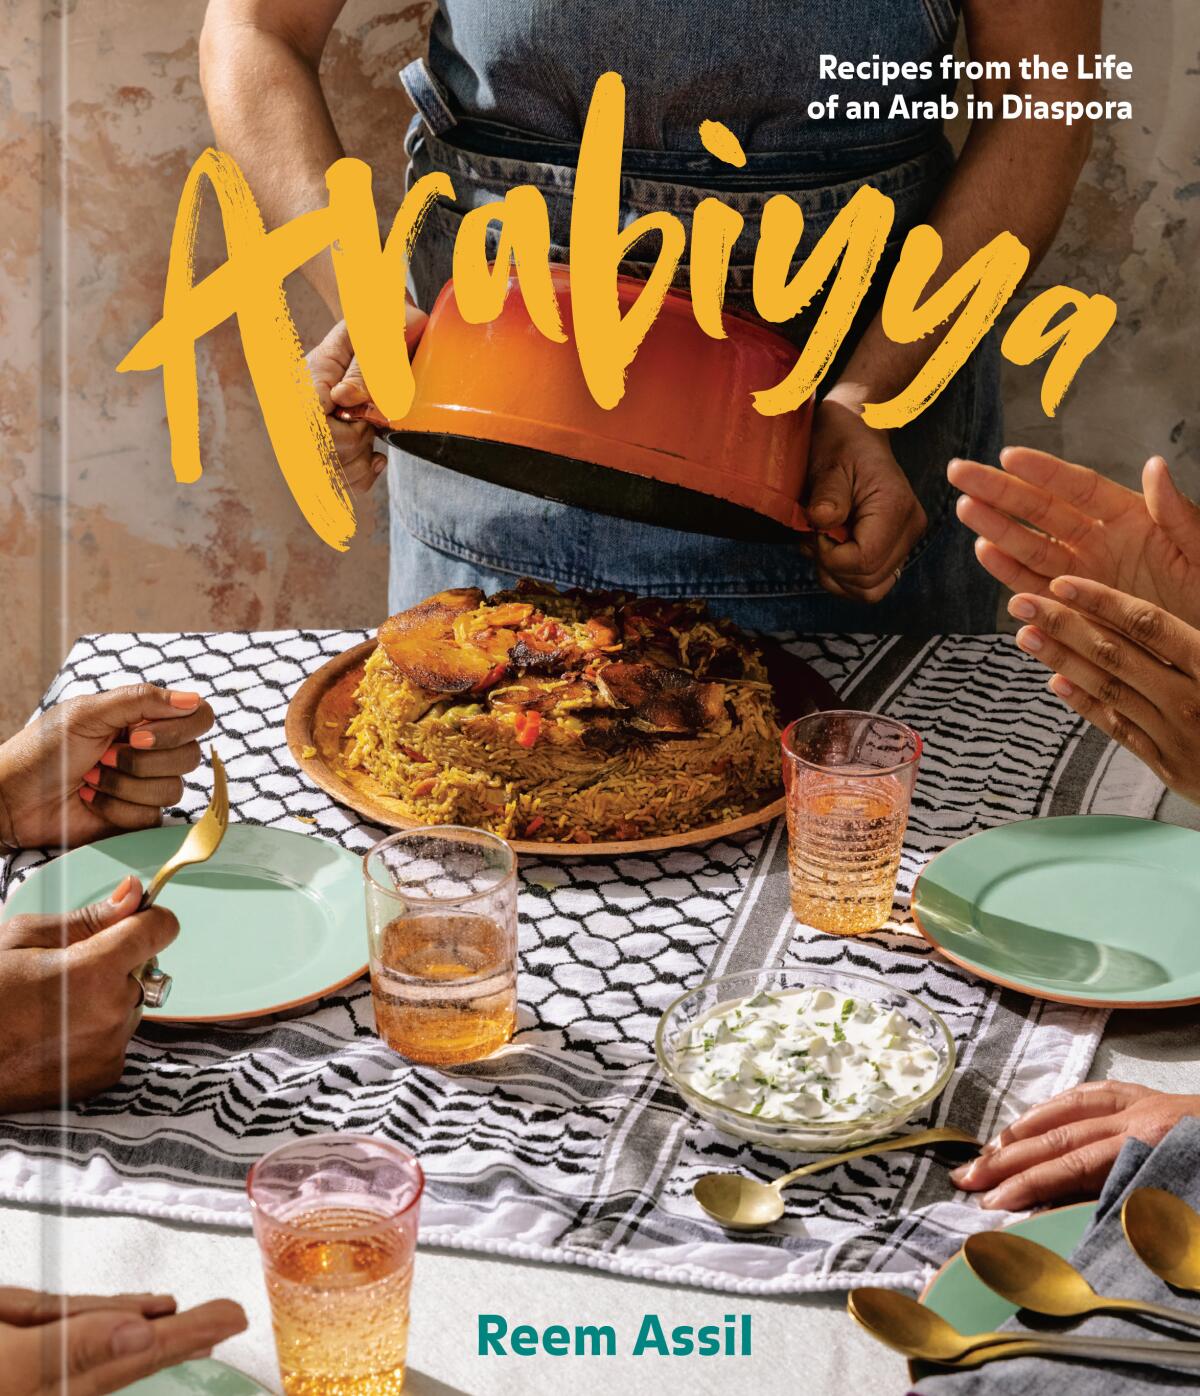 The cover of a book shows a close-up of plates and hands and a main dish on a dining table.